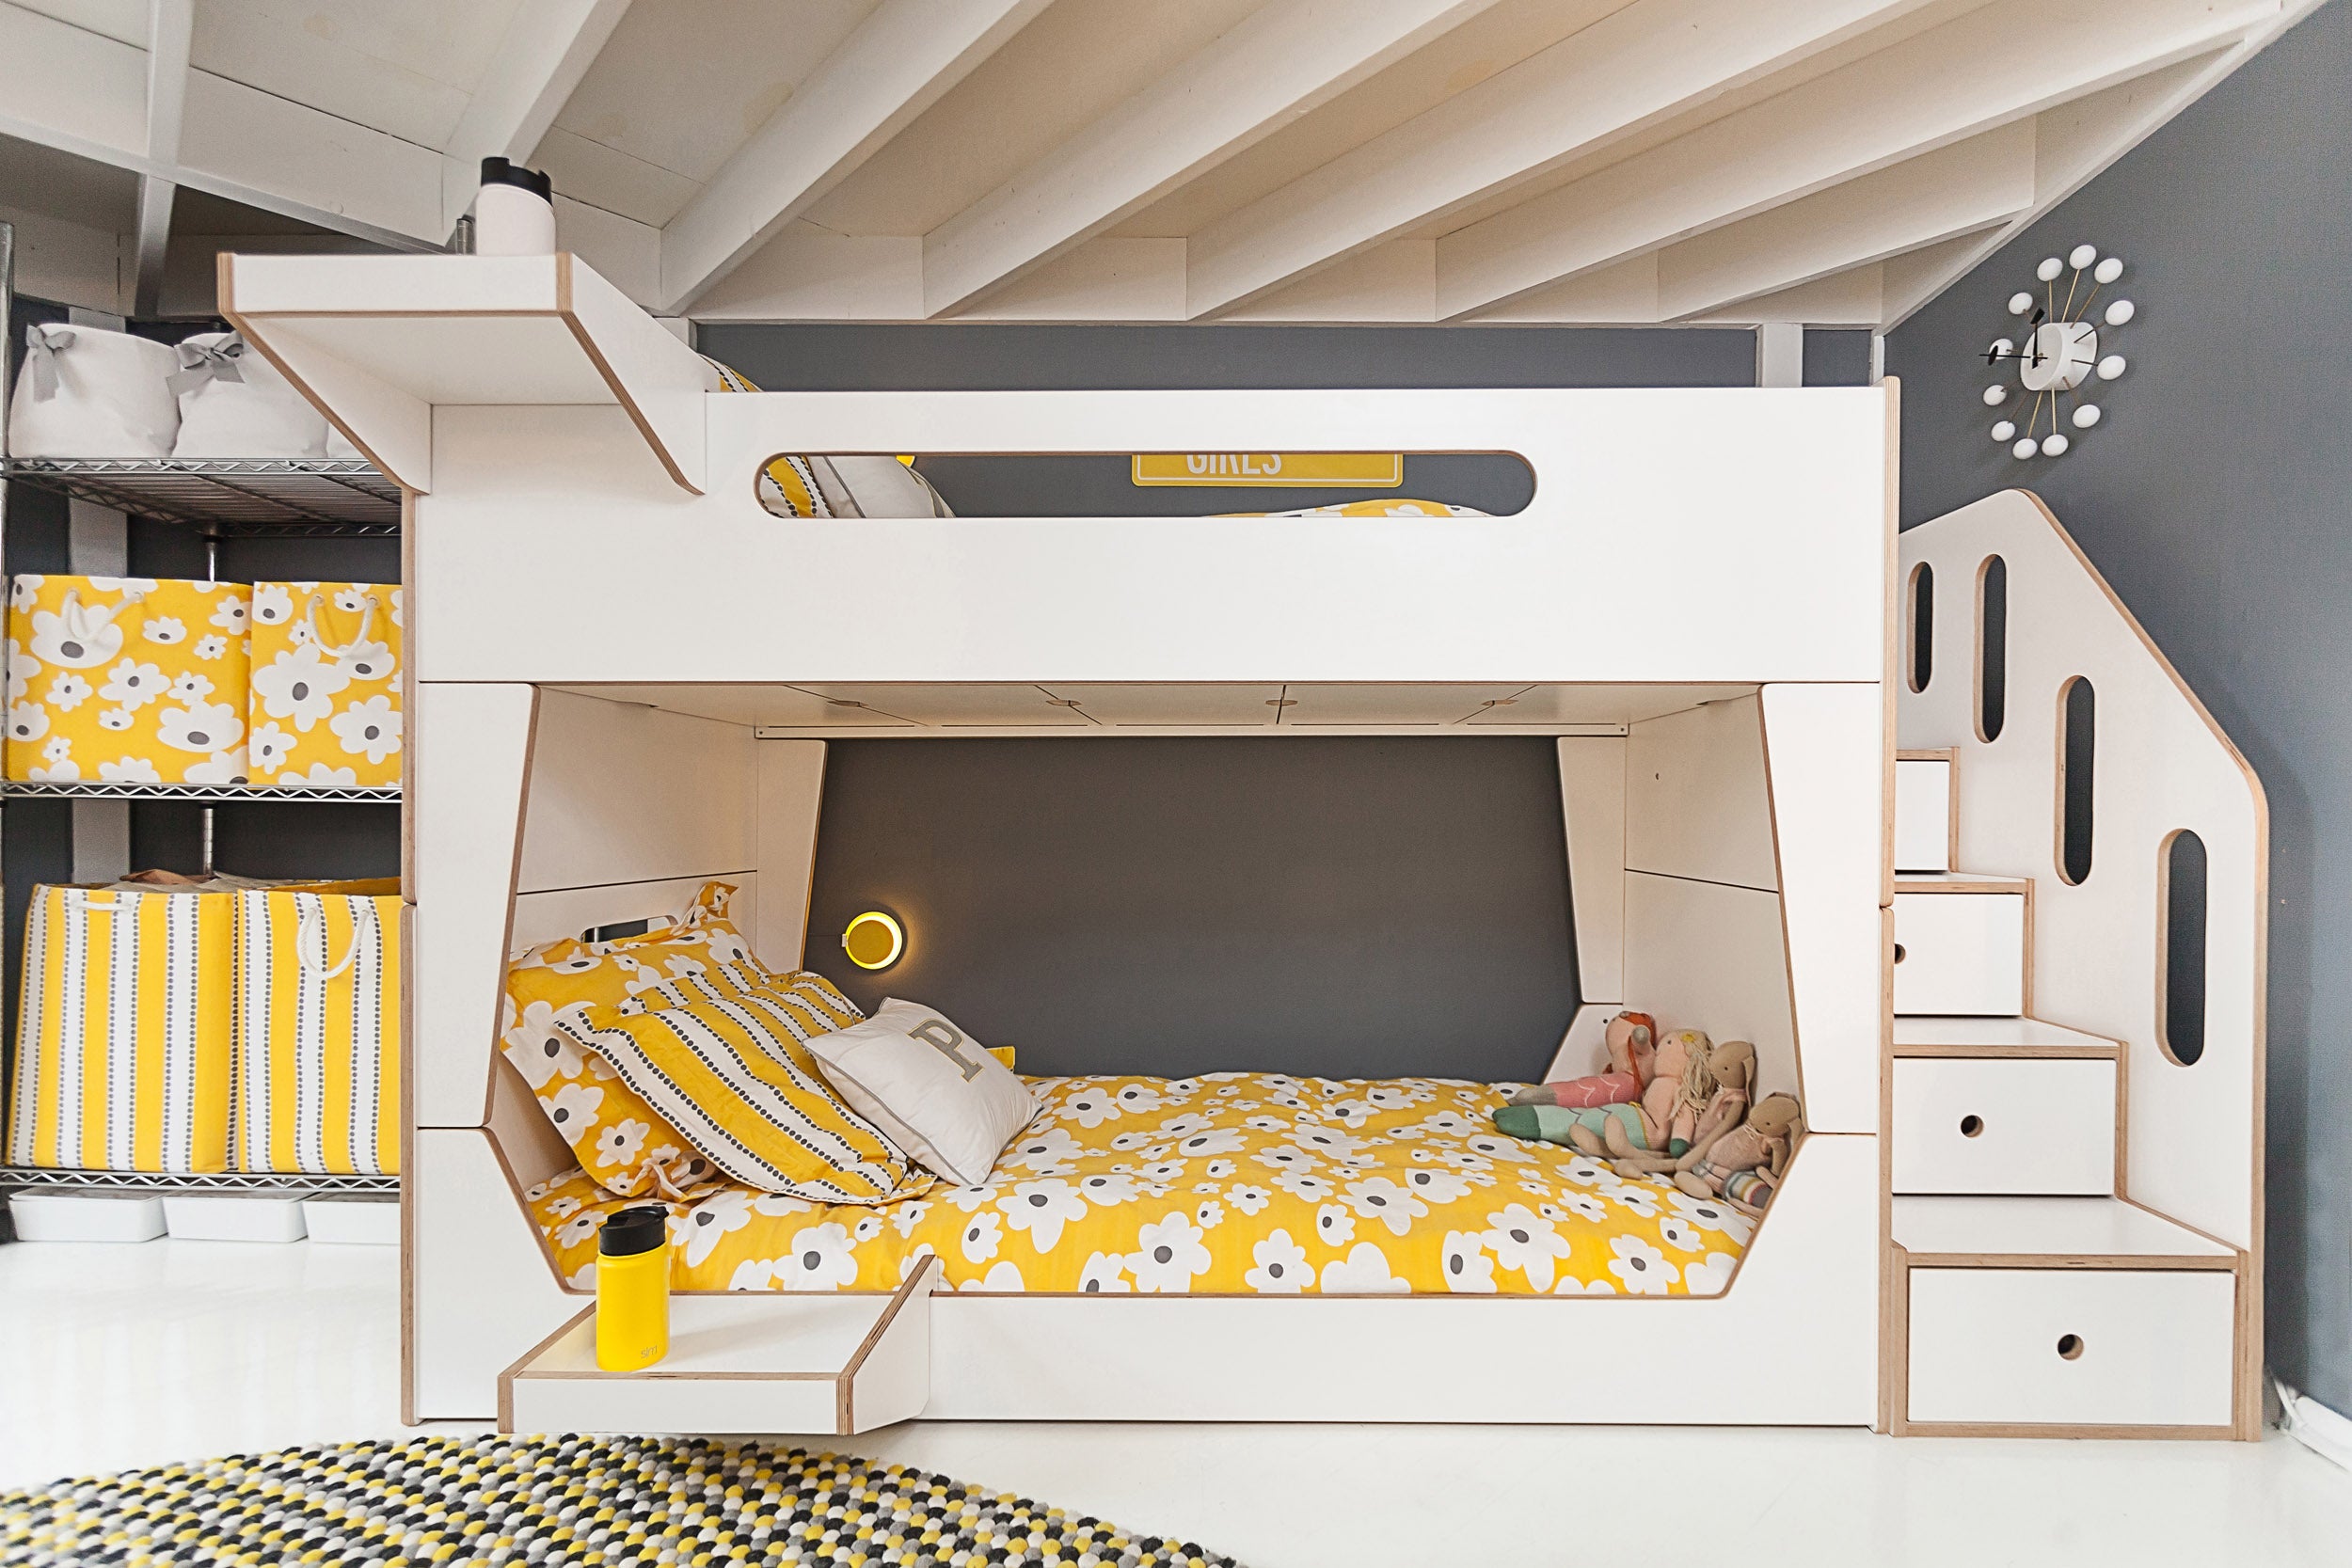 Modern kids’ room with bunk bed, storage, and yellow details.